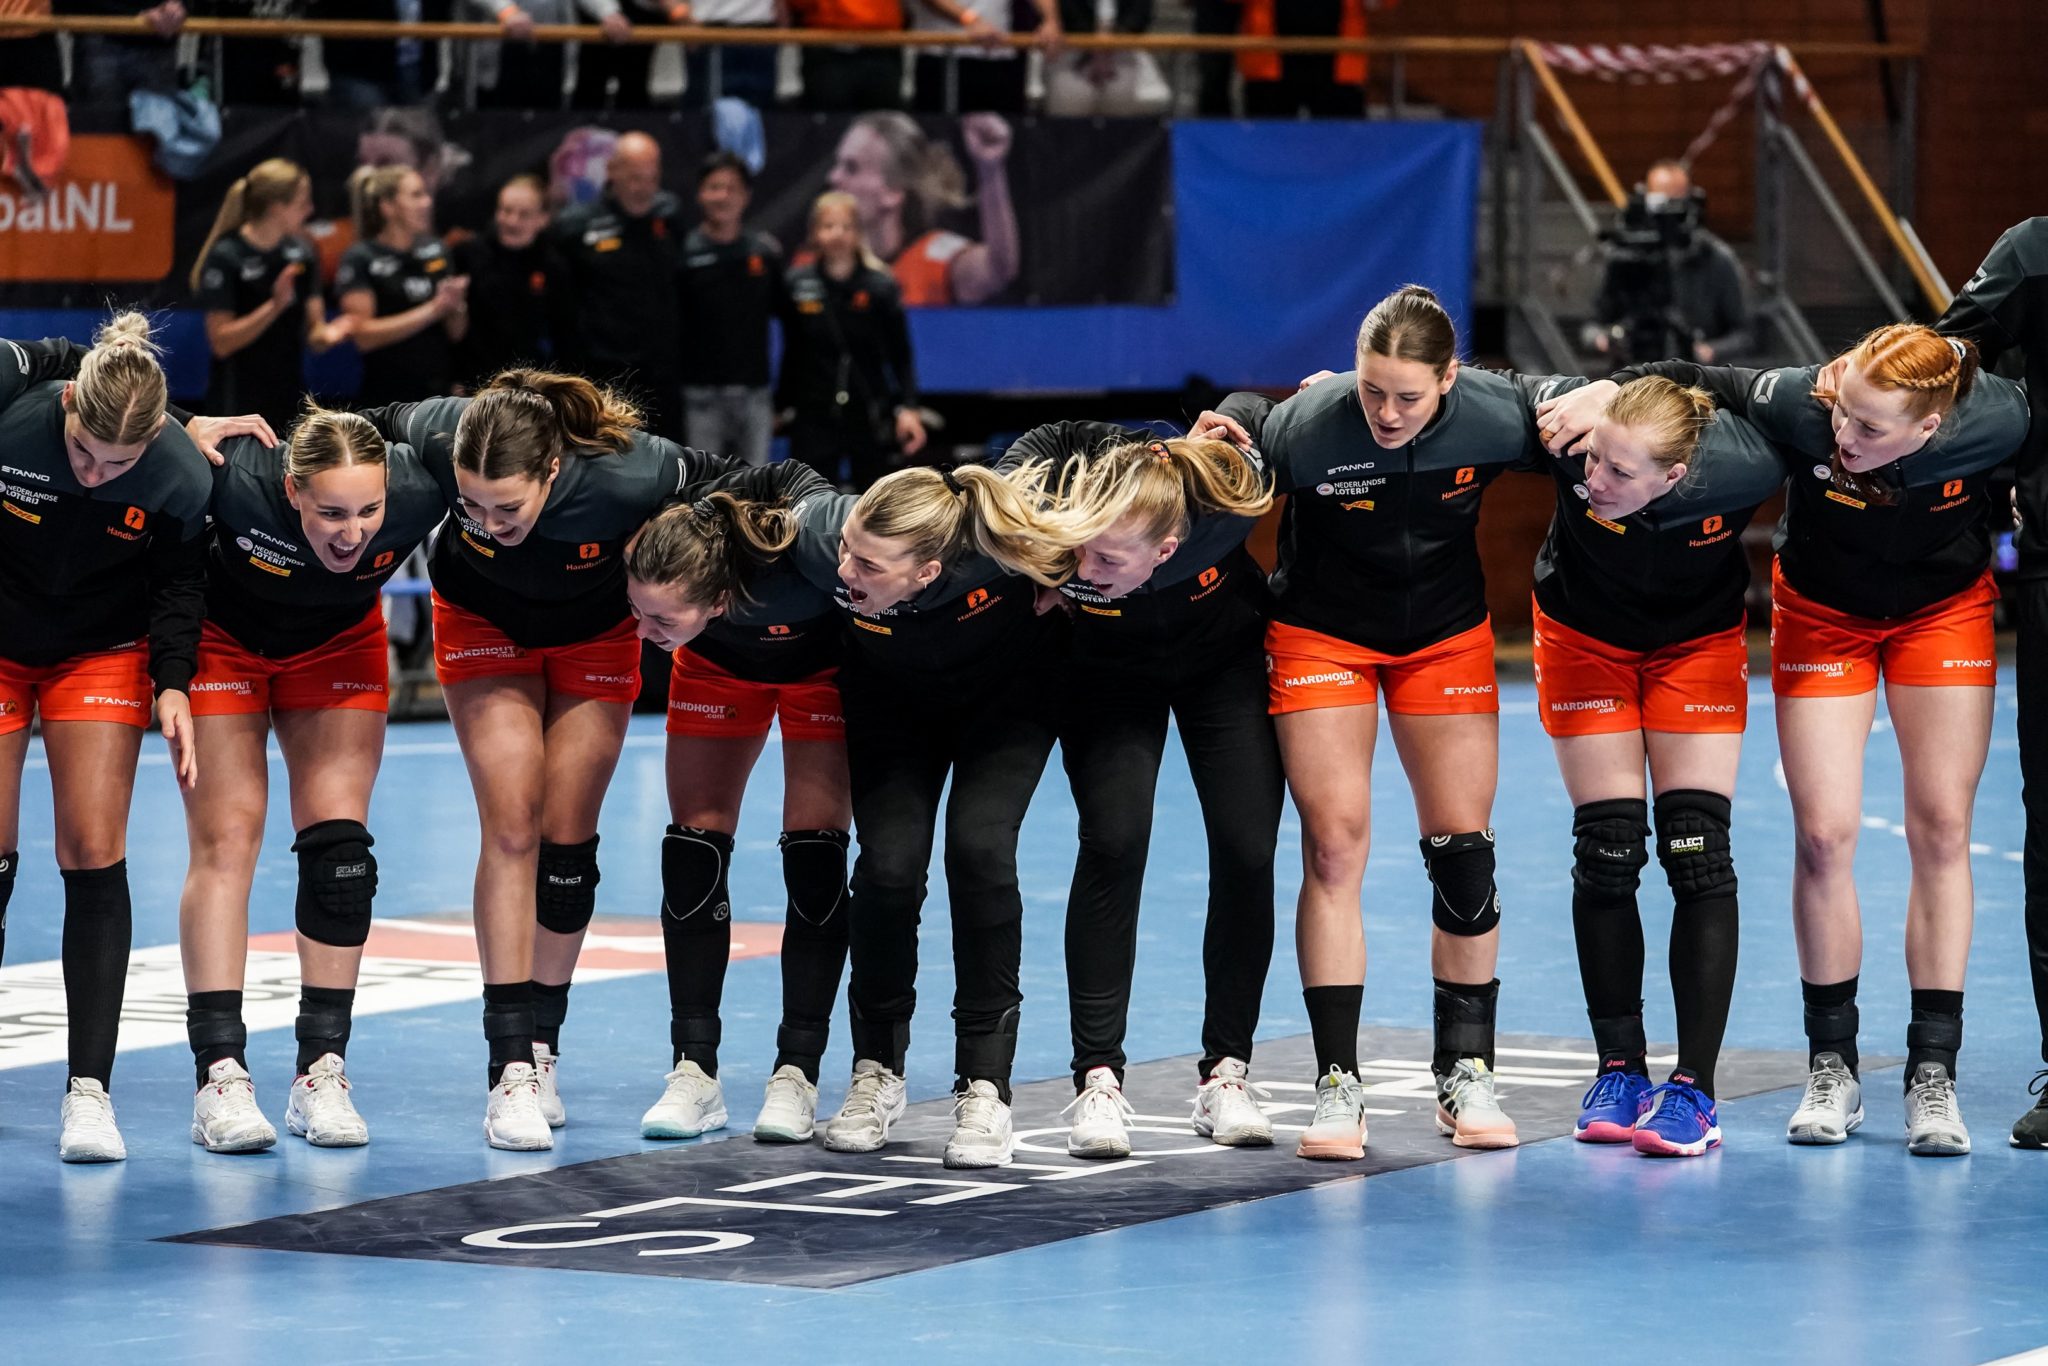 24-04-2022 HANDBAL:NEDERLAND-GRIEKENLAND:ALMERE
Tess Wester Of The Netherlands Lines Up With Her Team Mates During The EHF EURO 2022 Qualifiers Phase 2 Match Between Netherlands And Greece At Topsportcentrum Almere On April 24, 2022 In Almere, Netherlands (Photo By Henk Seppen)